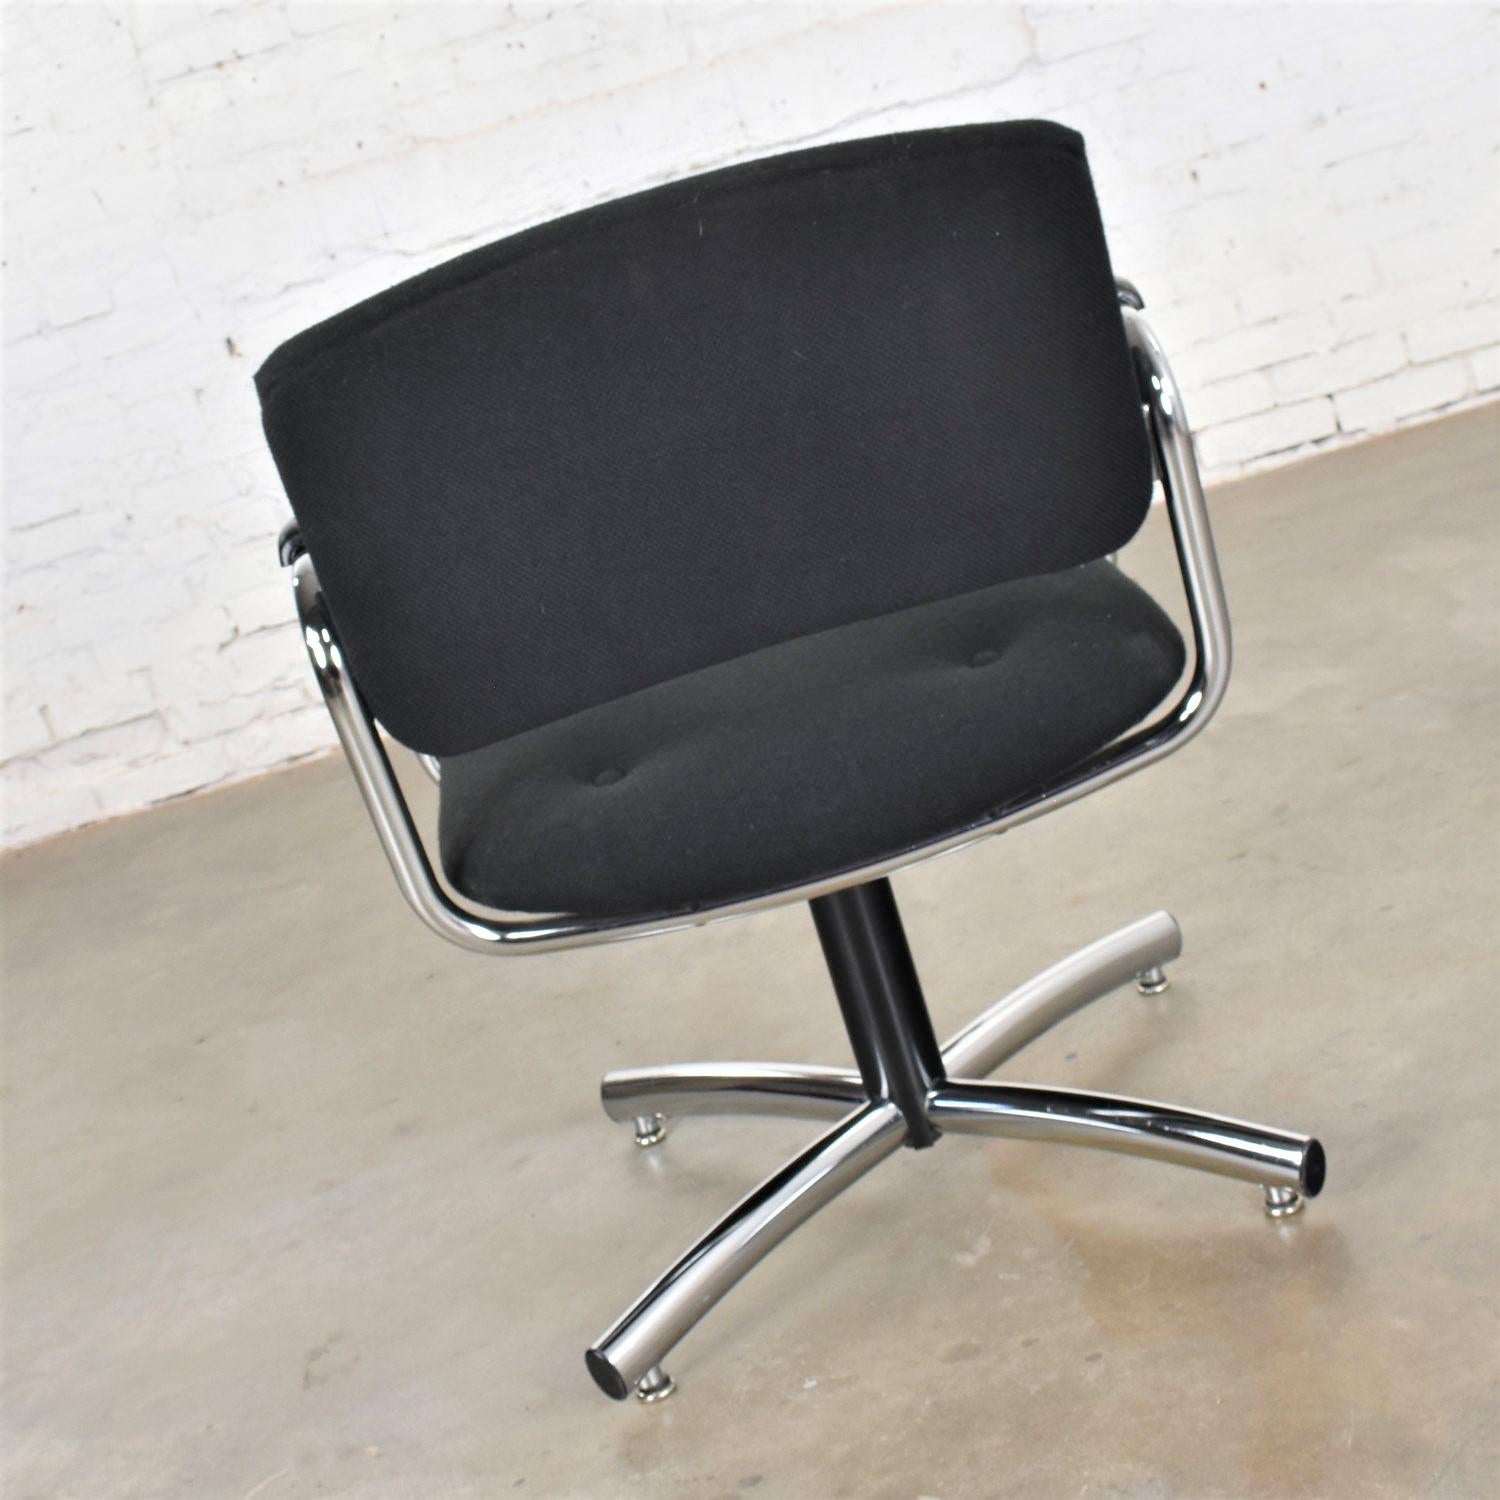 Faux Leather Vintage Modern Chrome & Black Office Armchair 4 Prong Base Style Steelcase, 1970